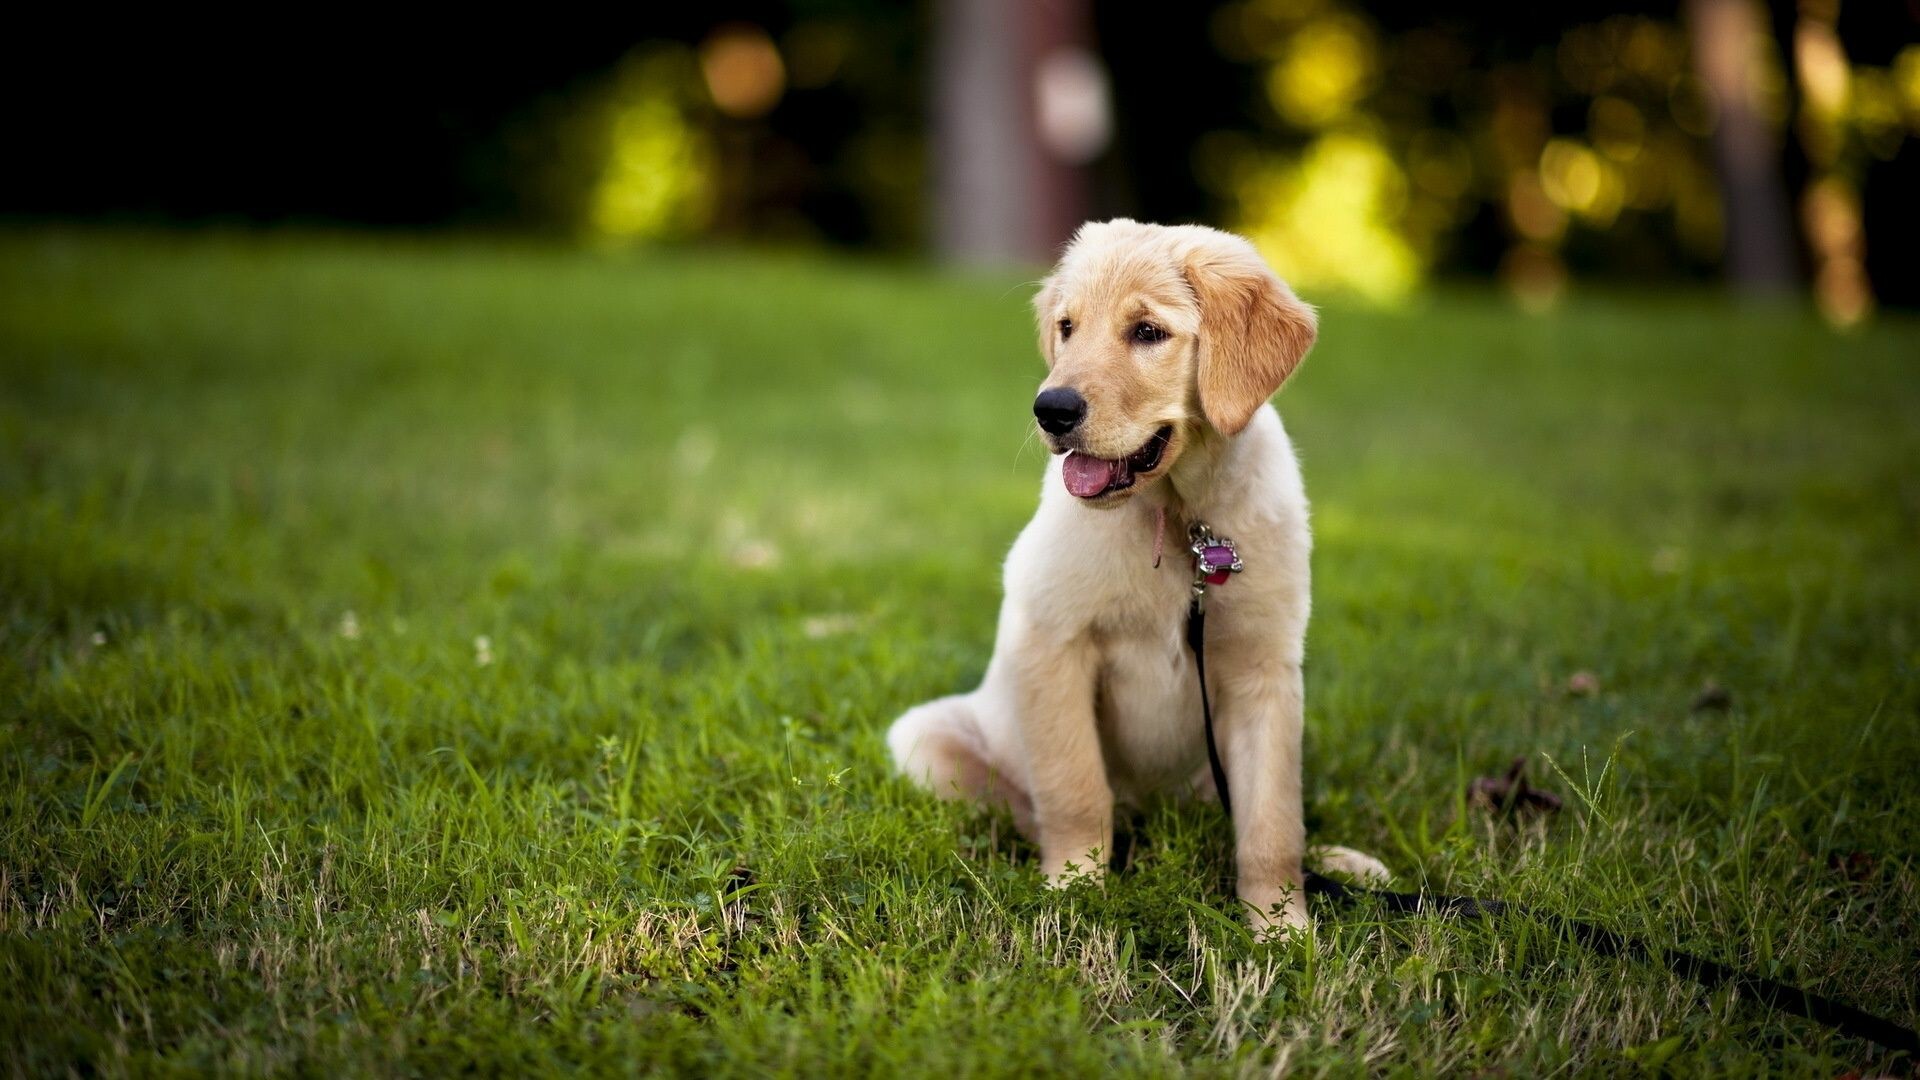 Labrador Retriever: Puppies in the same litter can be black, chocolate or yellow. 1920x1080 Full HD Background.